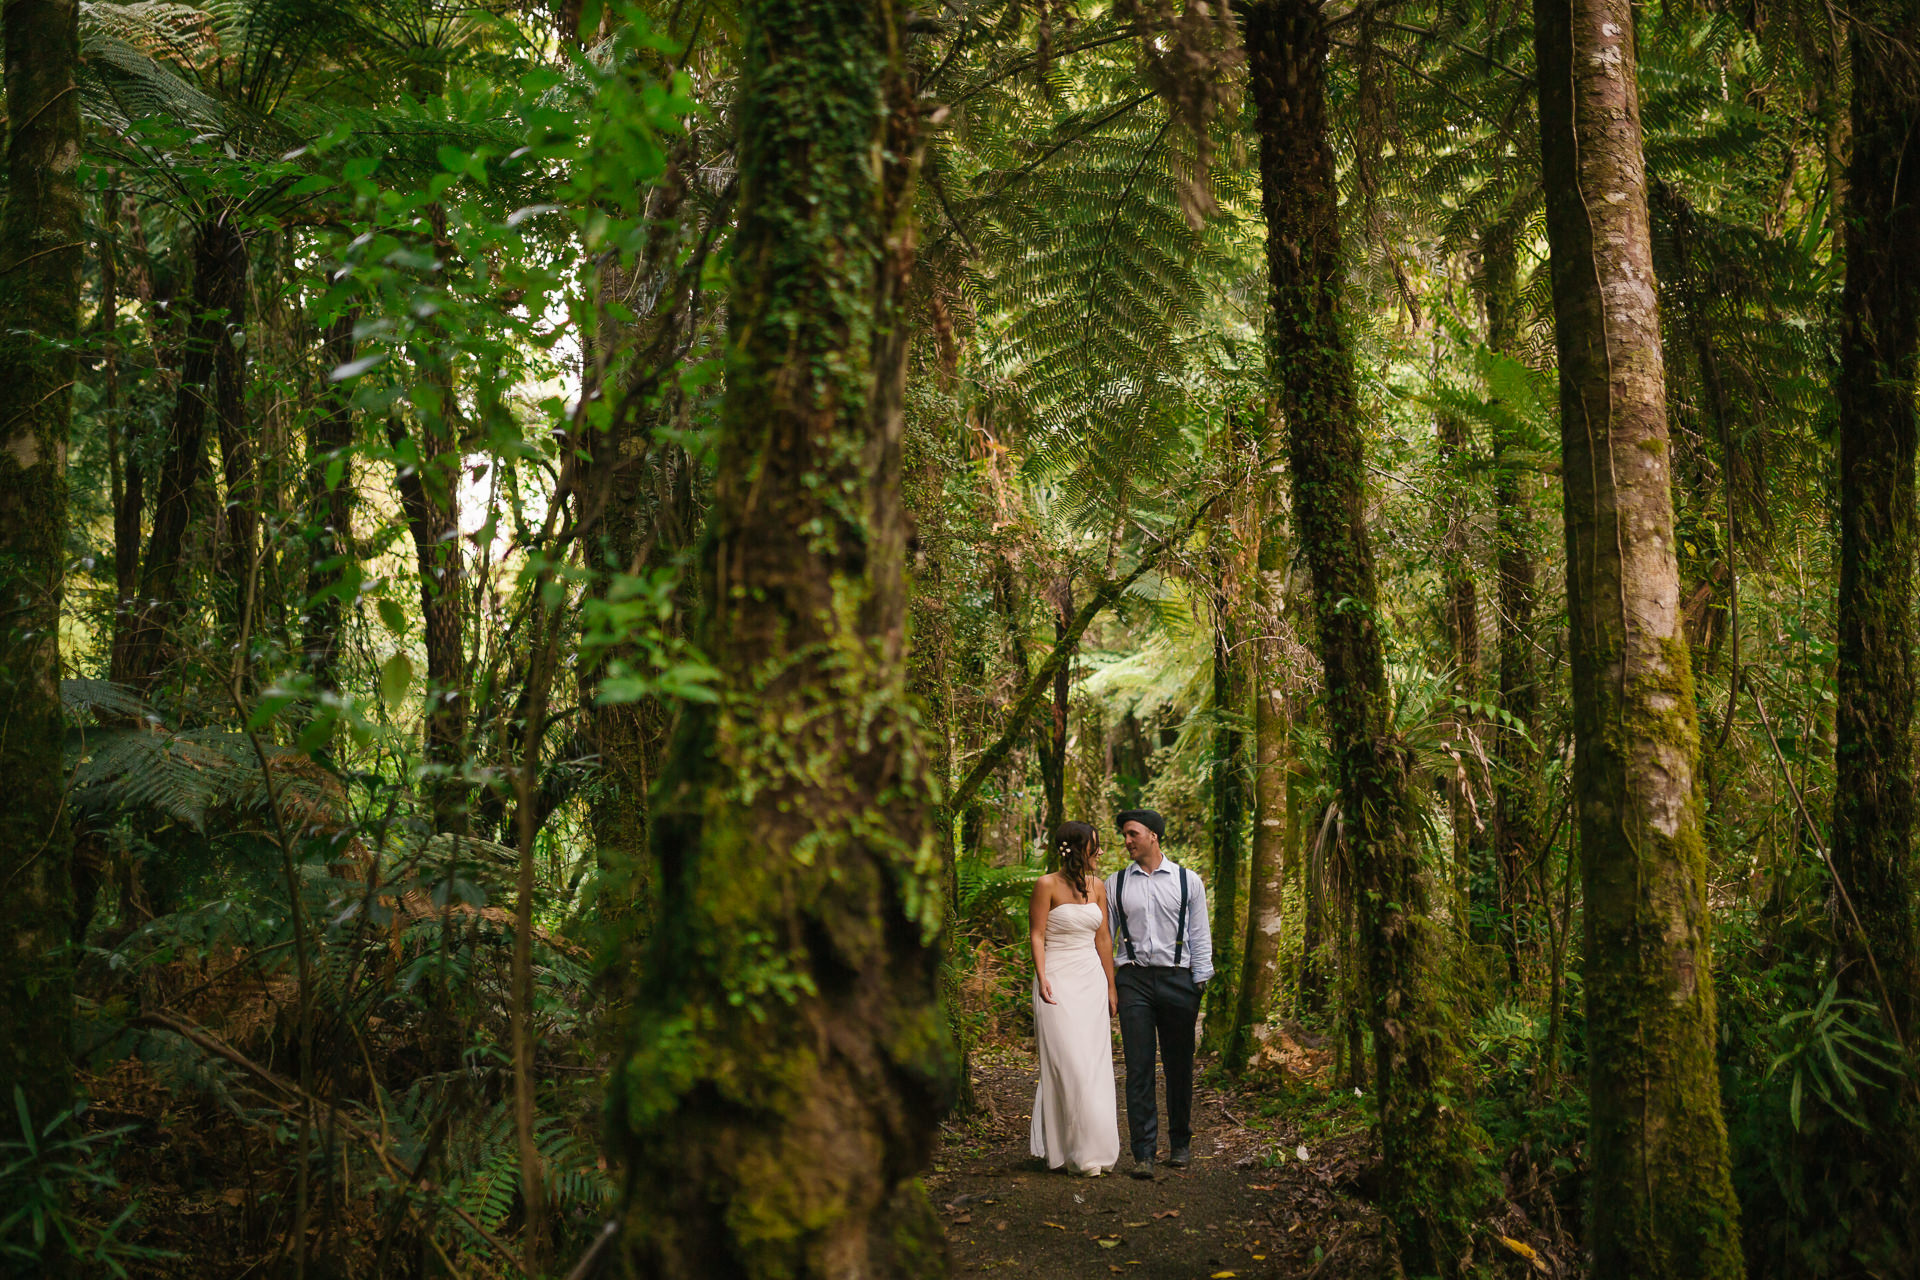 The_Official_Photographers_shannon-Noel-Pirongia-forest-park-wedding_MG_3916